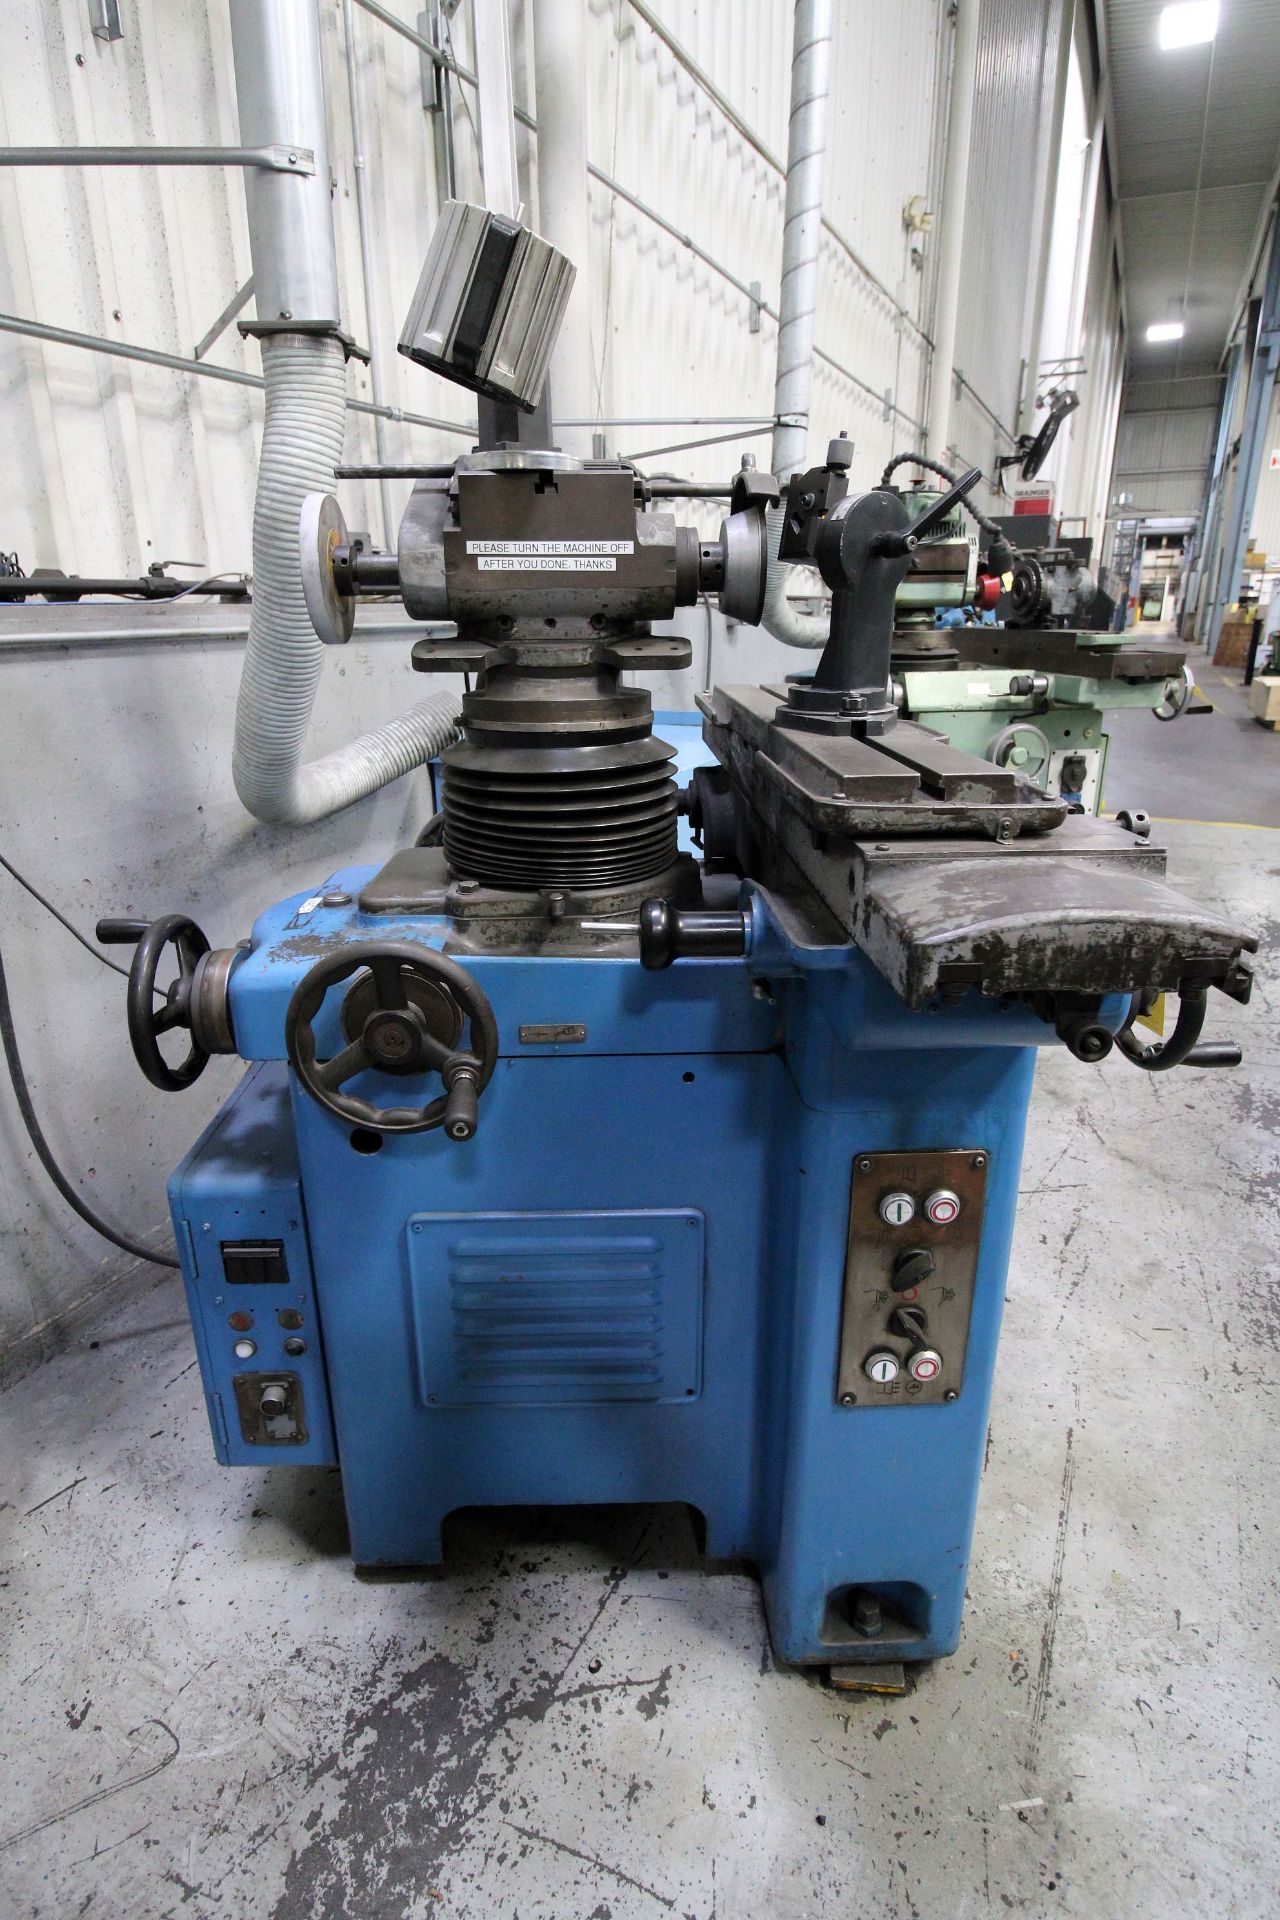 TOOL & CUTTER GRINDER, MAKINO TYPE C40, S/N E42-2705 - Image 4 of 5